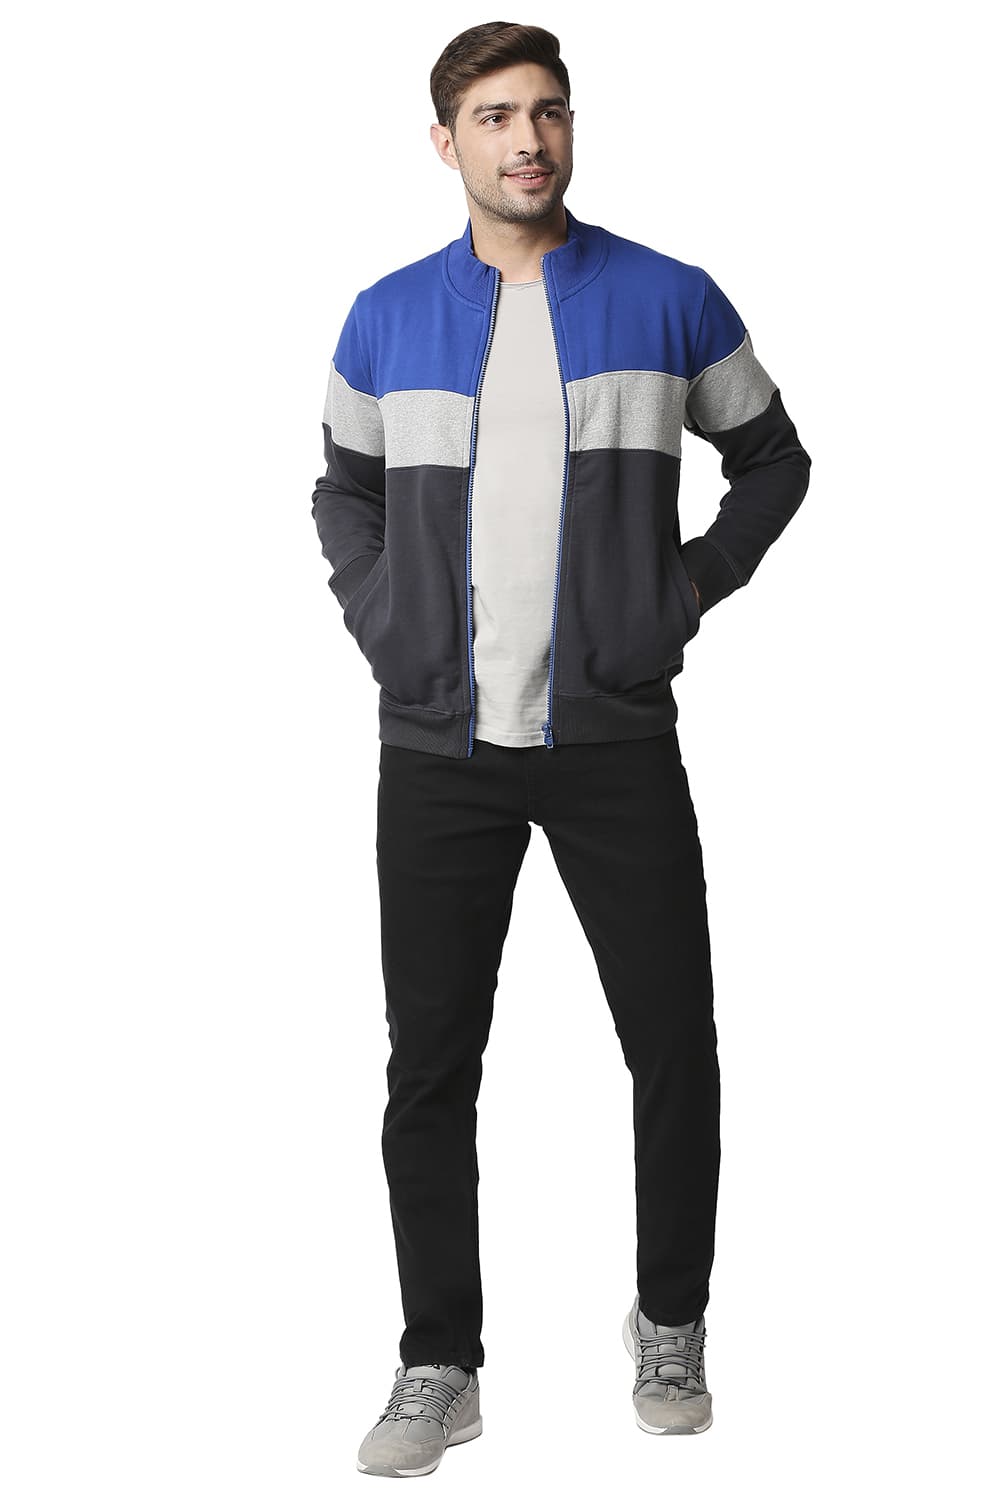 BASICS MUSCLE FIT LOOP KNIT HIGH NECK JACKET